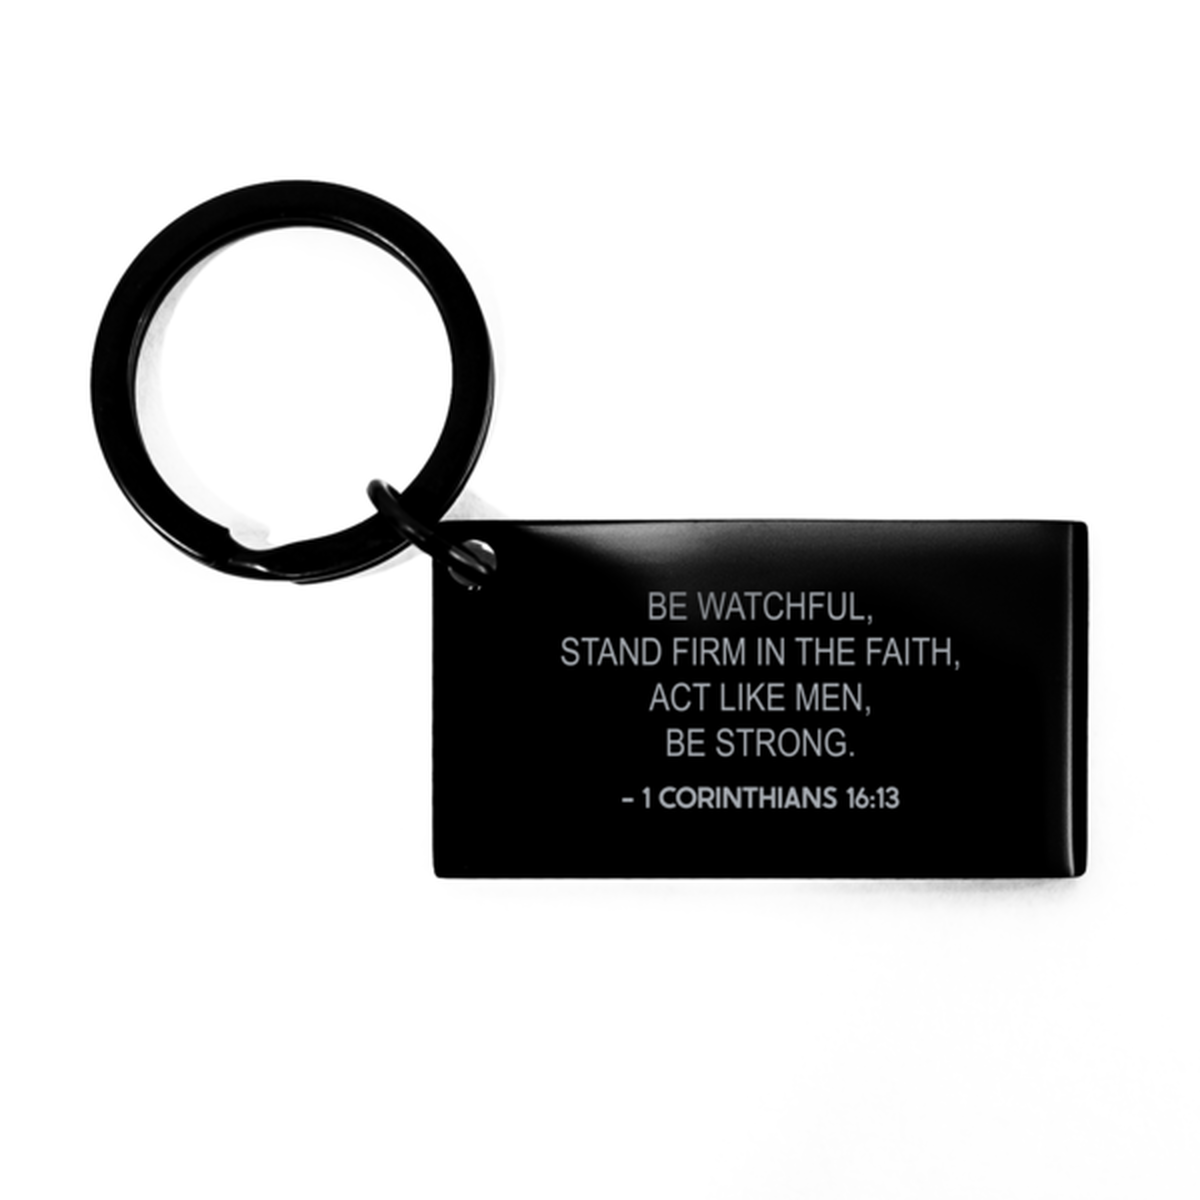 Bible Verse Black Keychain, 1 Corinthians 16:13 Be Watchful, Stand Firm In The Faith, Christian Inspirational Key Ring Gifts For Men Women